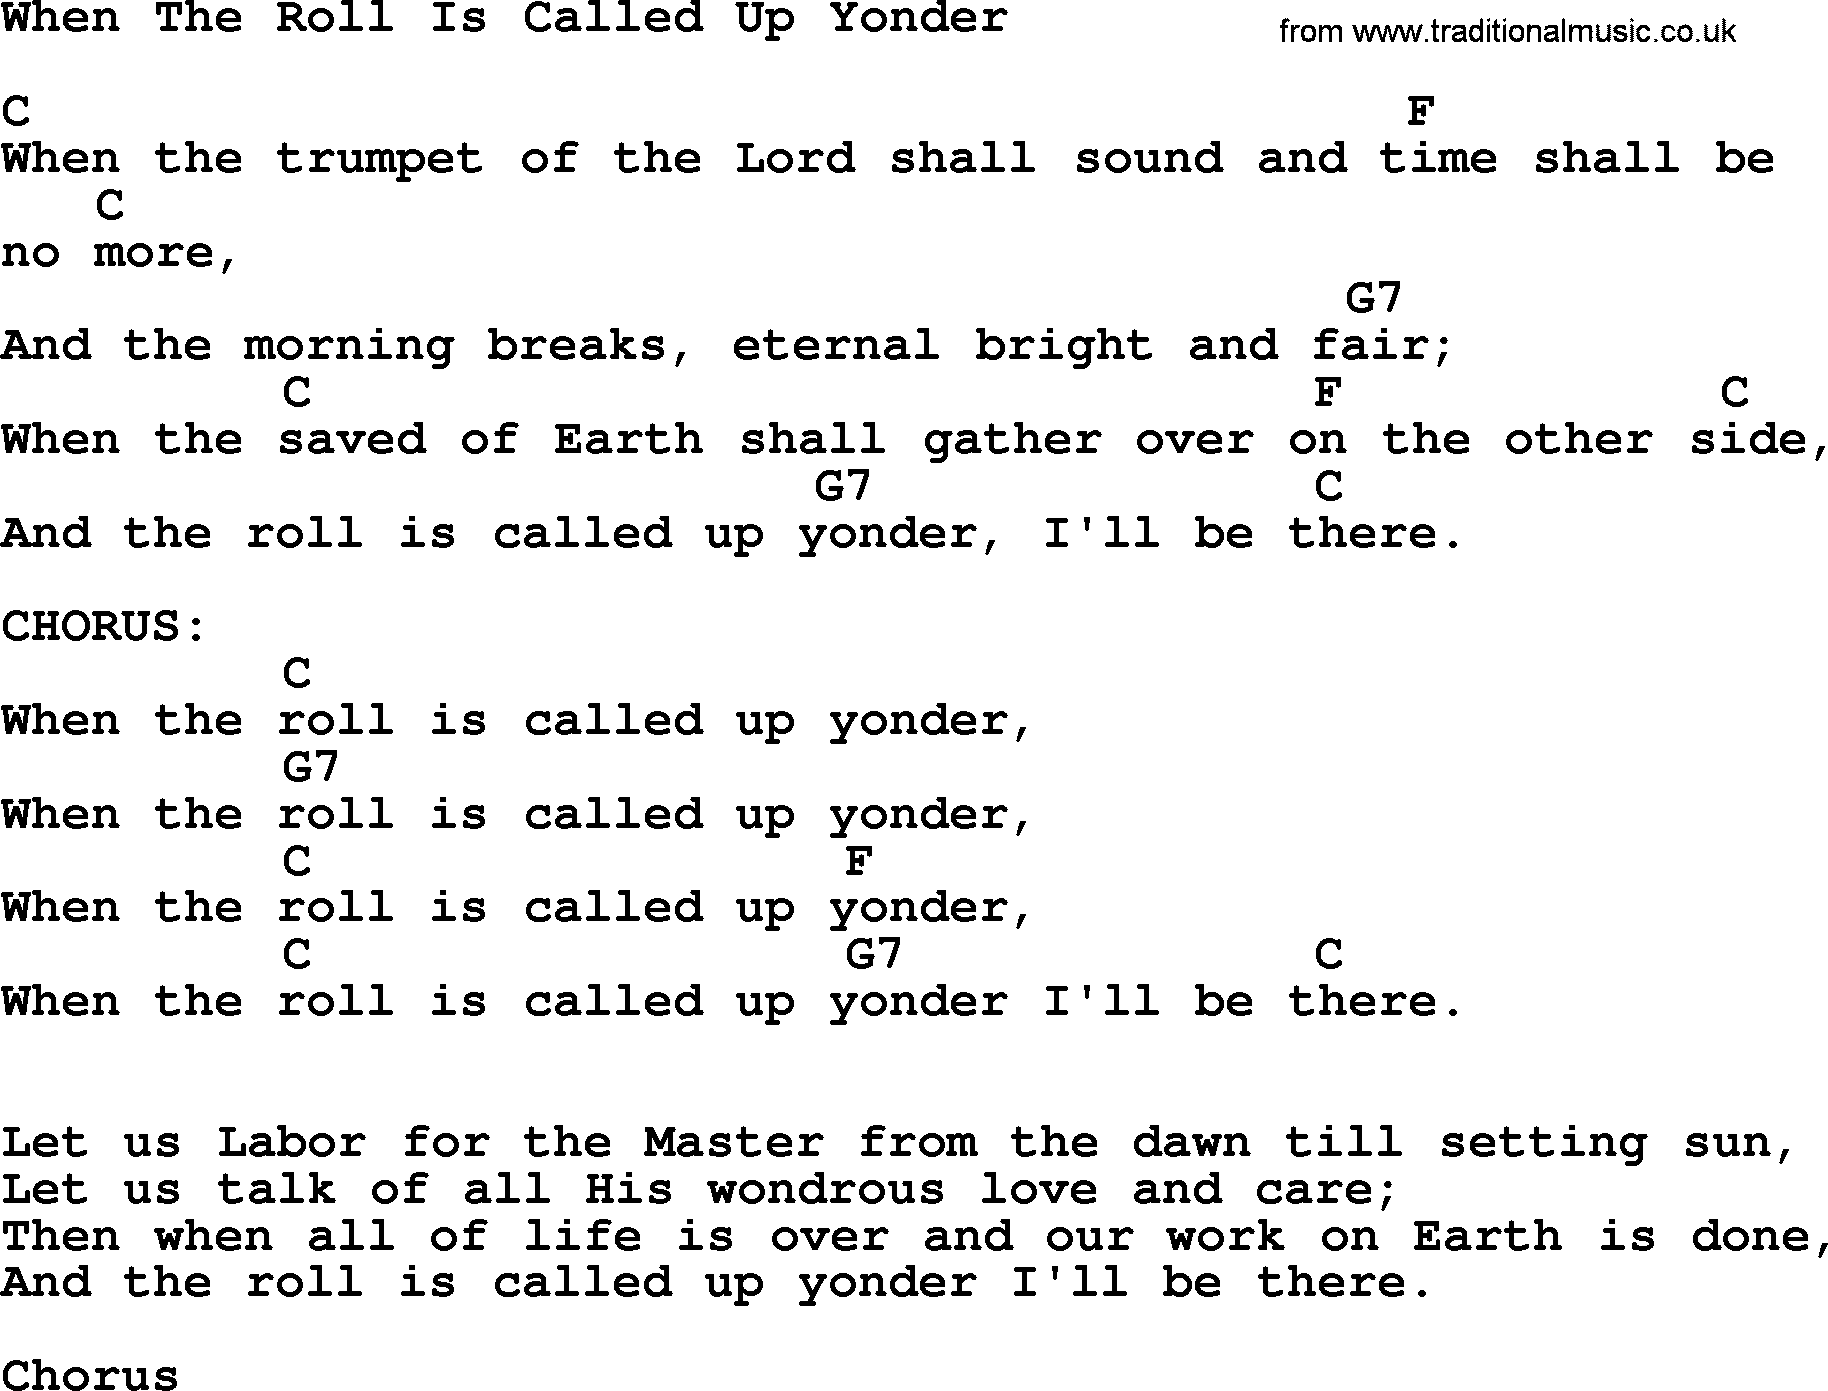 Johnny Cash song When The Roll Is Called Up Yonder, lyrics and chords